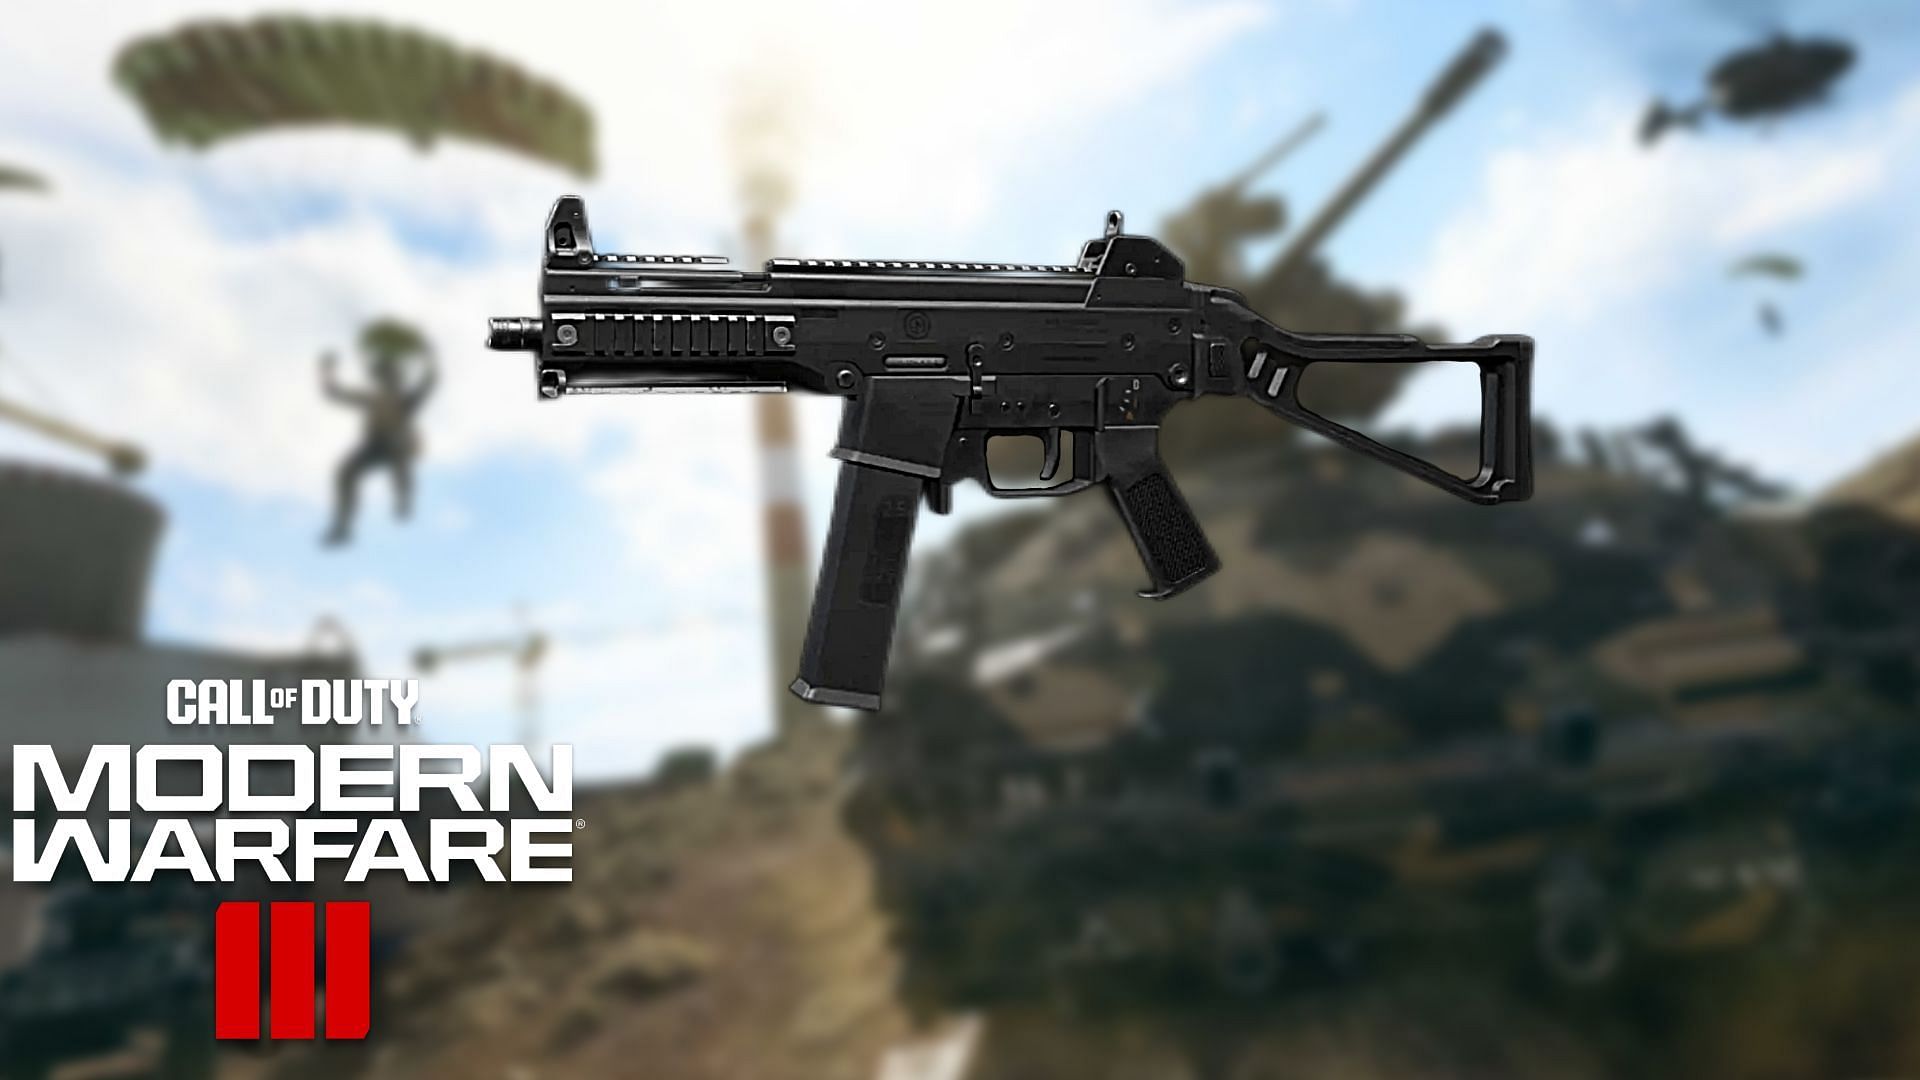 Modern Warfare 3 Beta - Recommended Loadouts and Perks